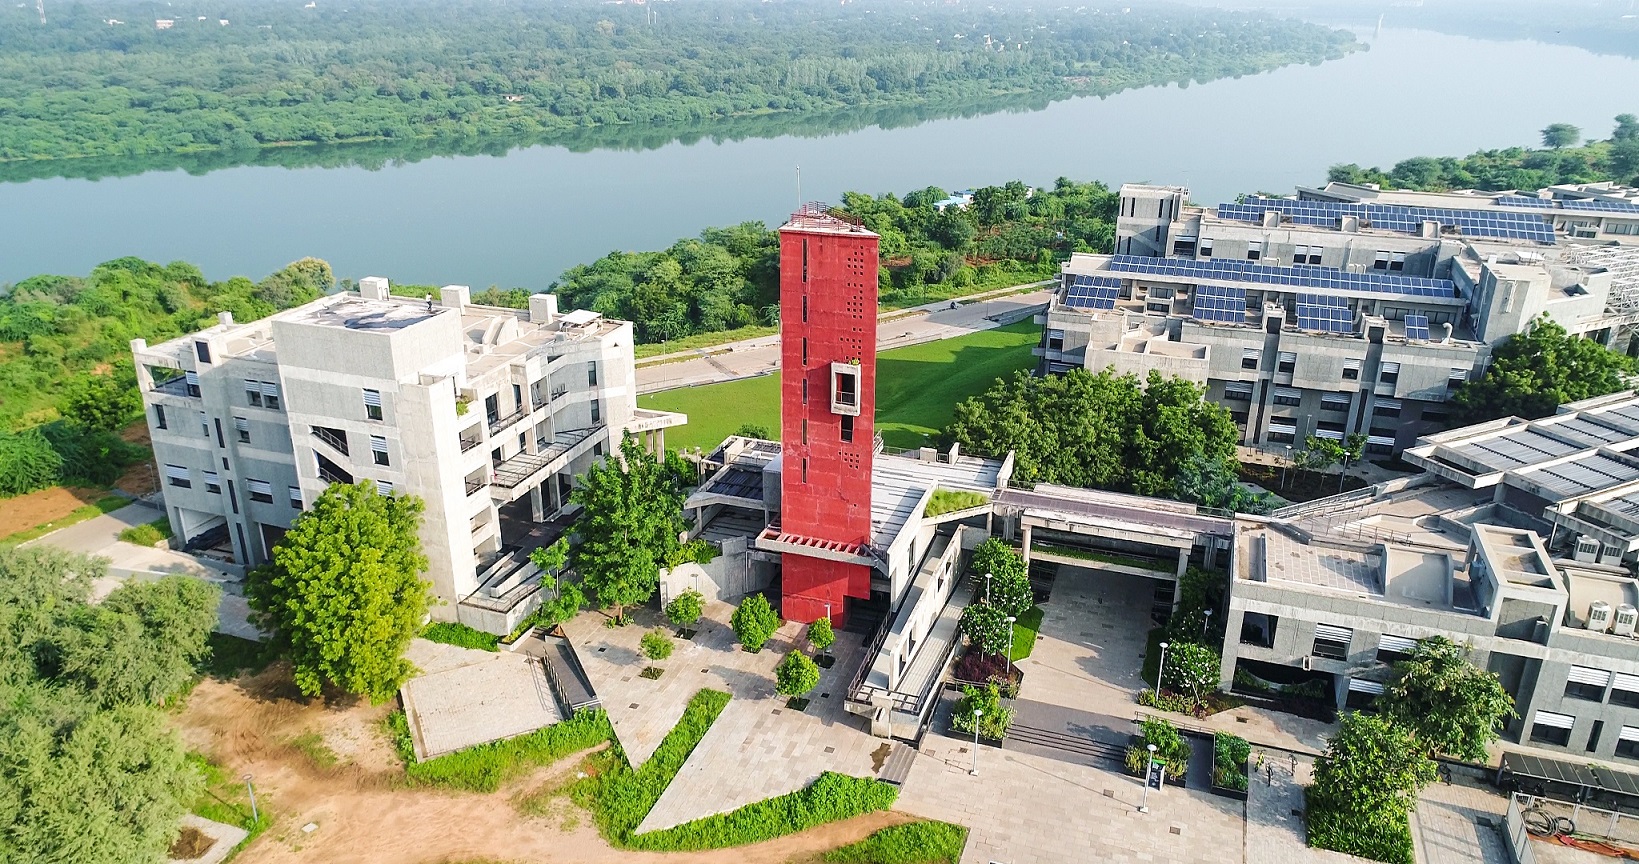 Two IITs Open PhD Admission June 2022 while IIT Bombay, Roorkee, Guwahati to Open Soon